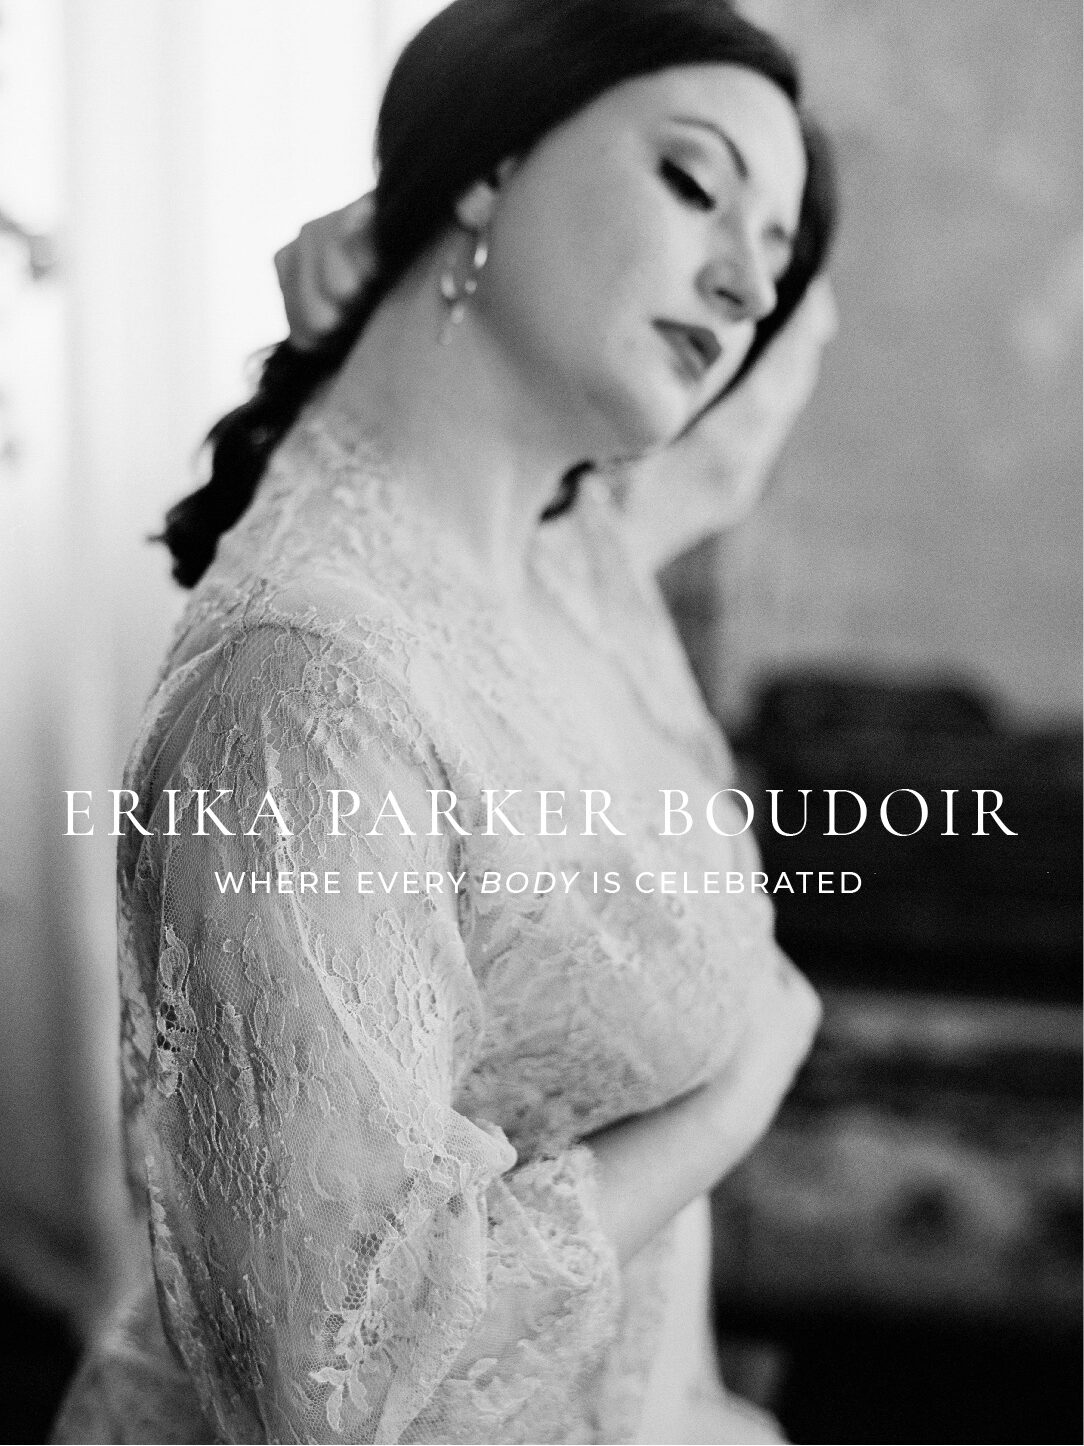 "Erika Parker Boudoir - where every body is celebrated"